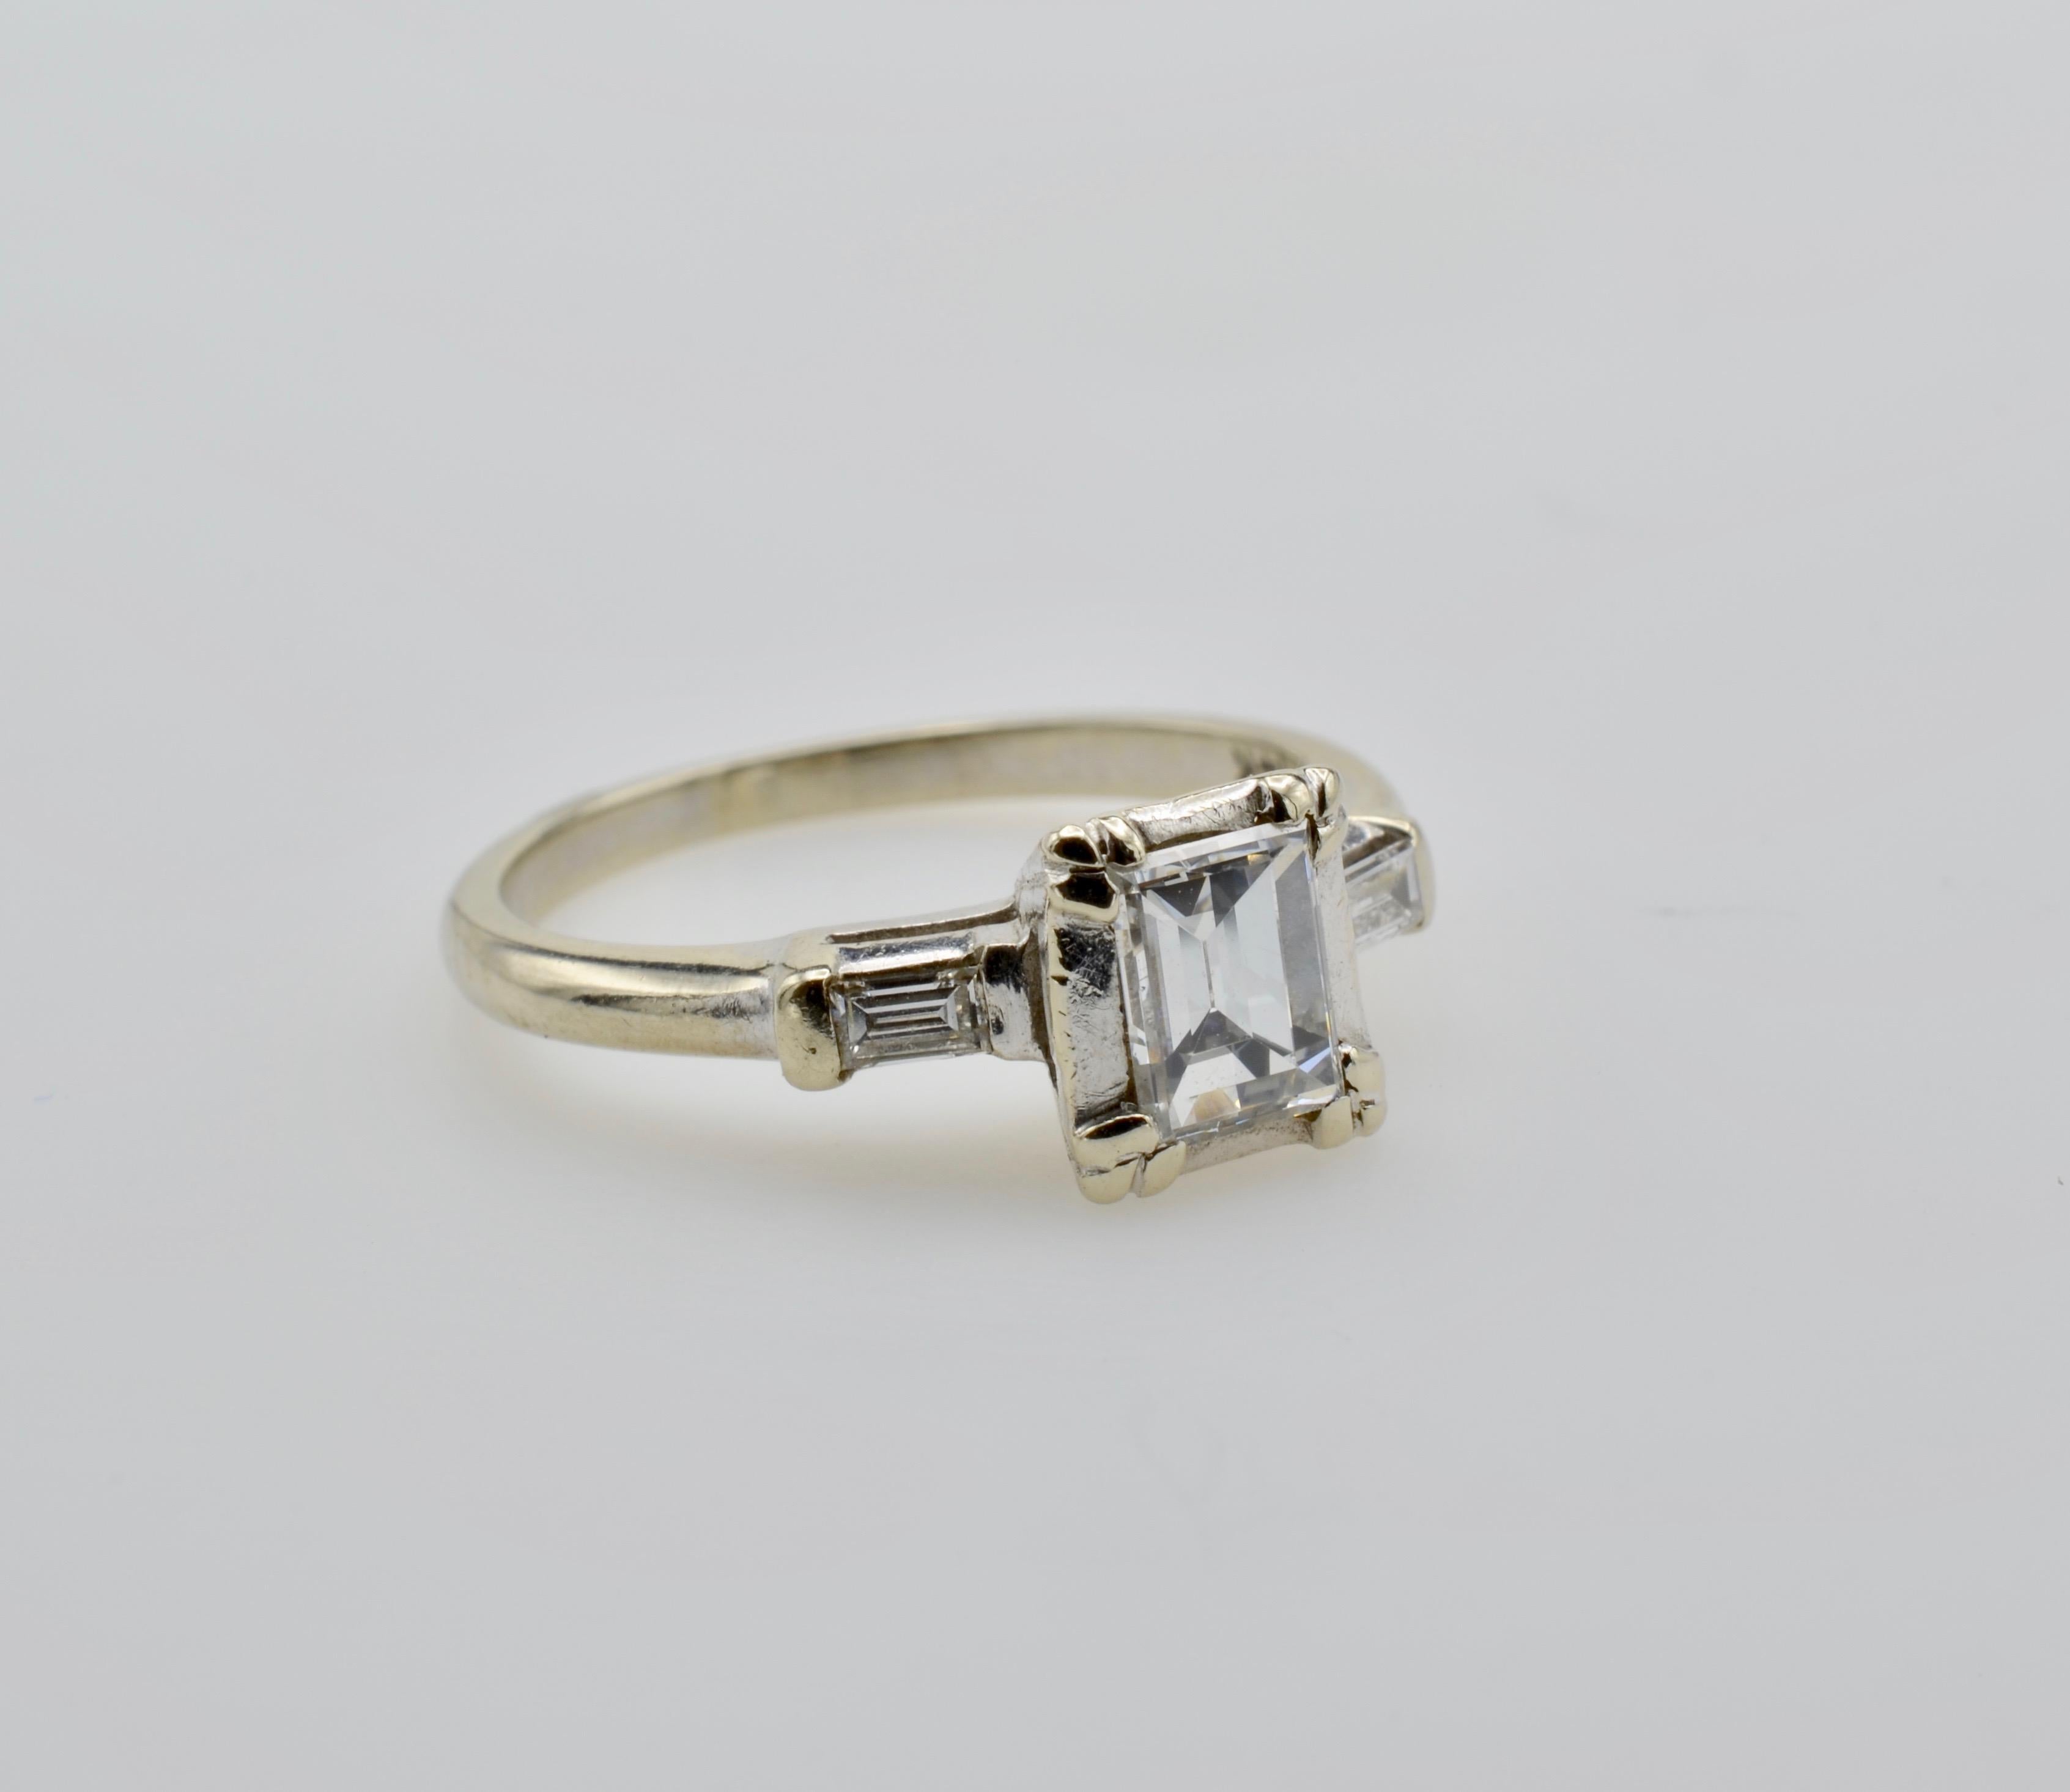 This stunner has an emerald cut (0.40 tw ) diamond quality VS2 and color G. The two side baguettes are 0.10 tw and beautifully compliment the clean and vibrant center diamond. Classic and sleek this engagement ring is simply elegant. The ring size